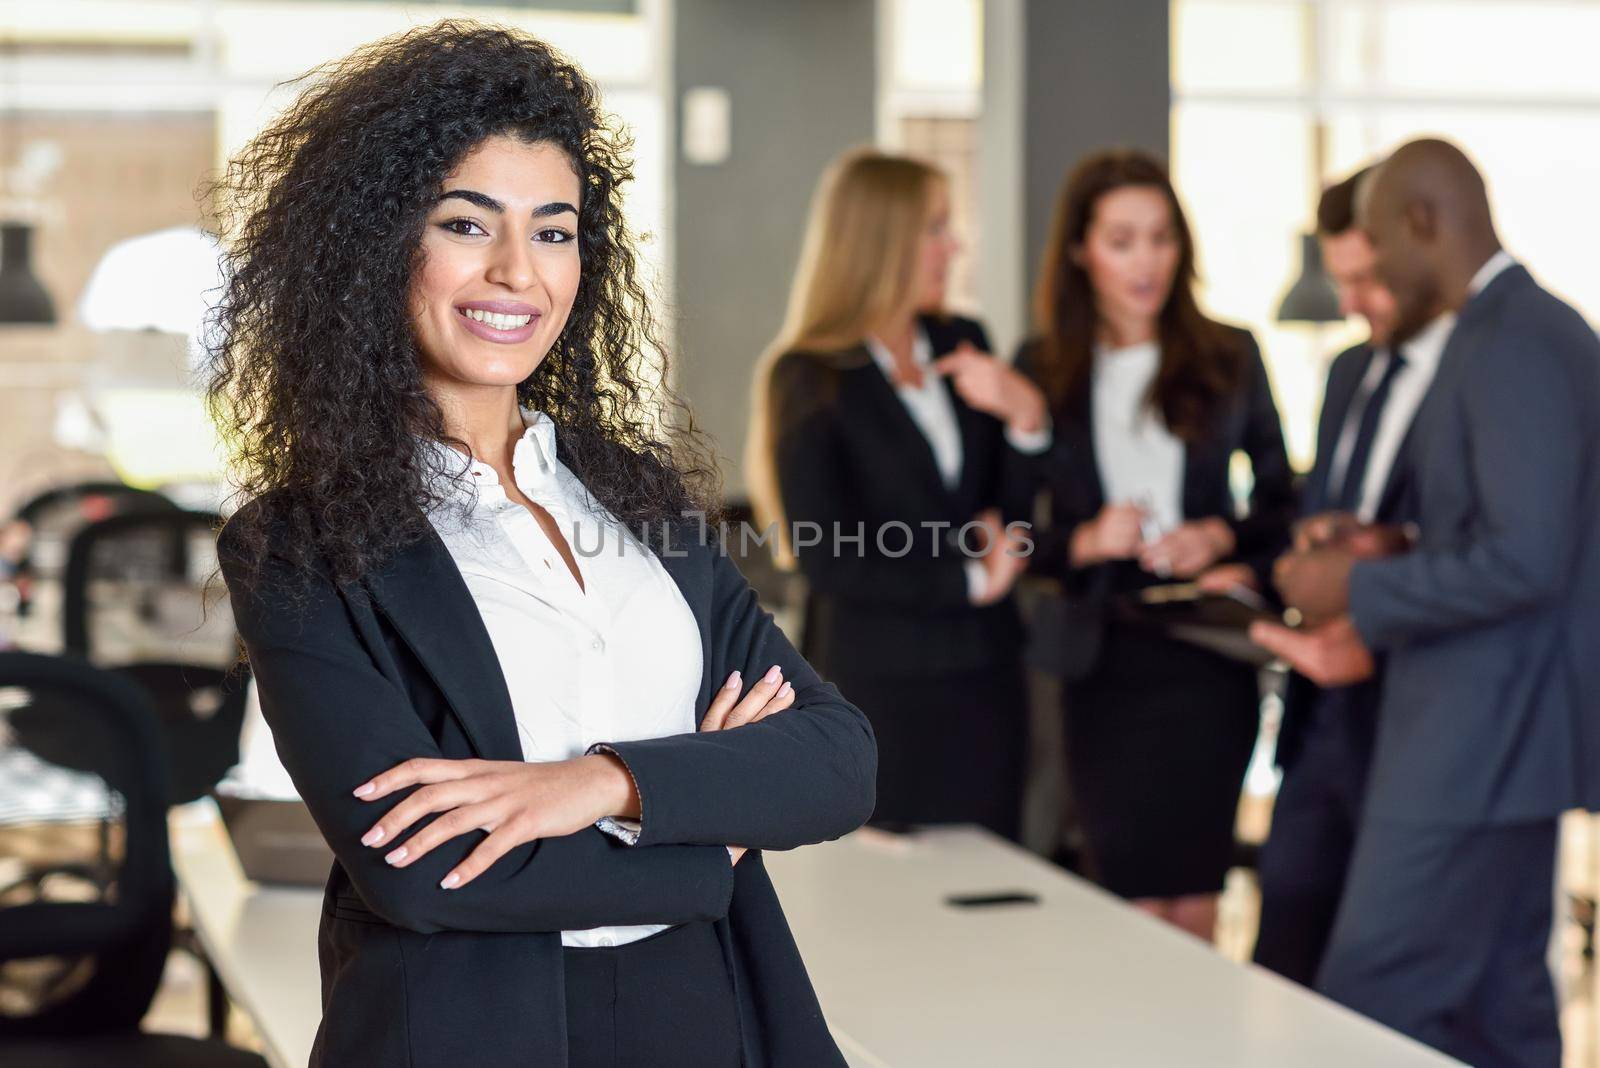 Businesswoman leader looking at camera in modern office with businesspeople working at the background. Teamwork concept. Muslim woman.